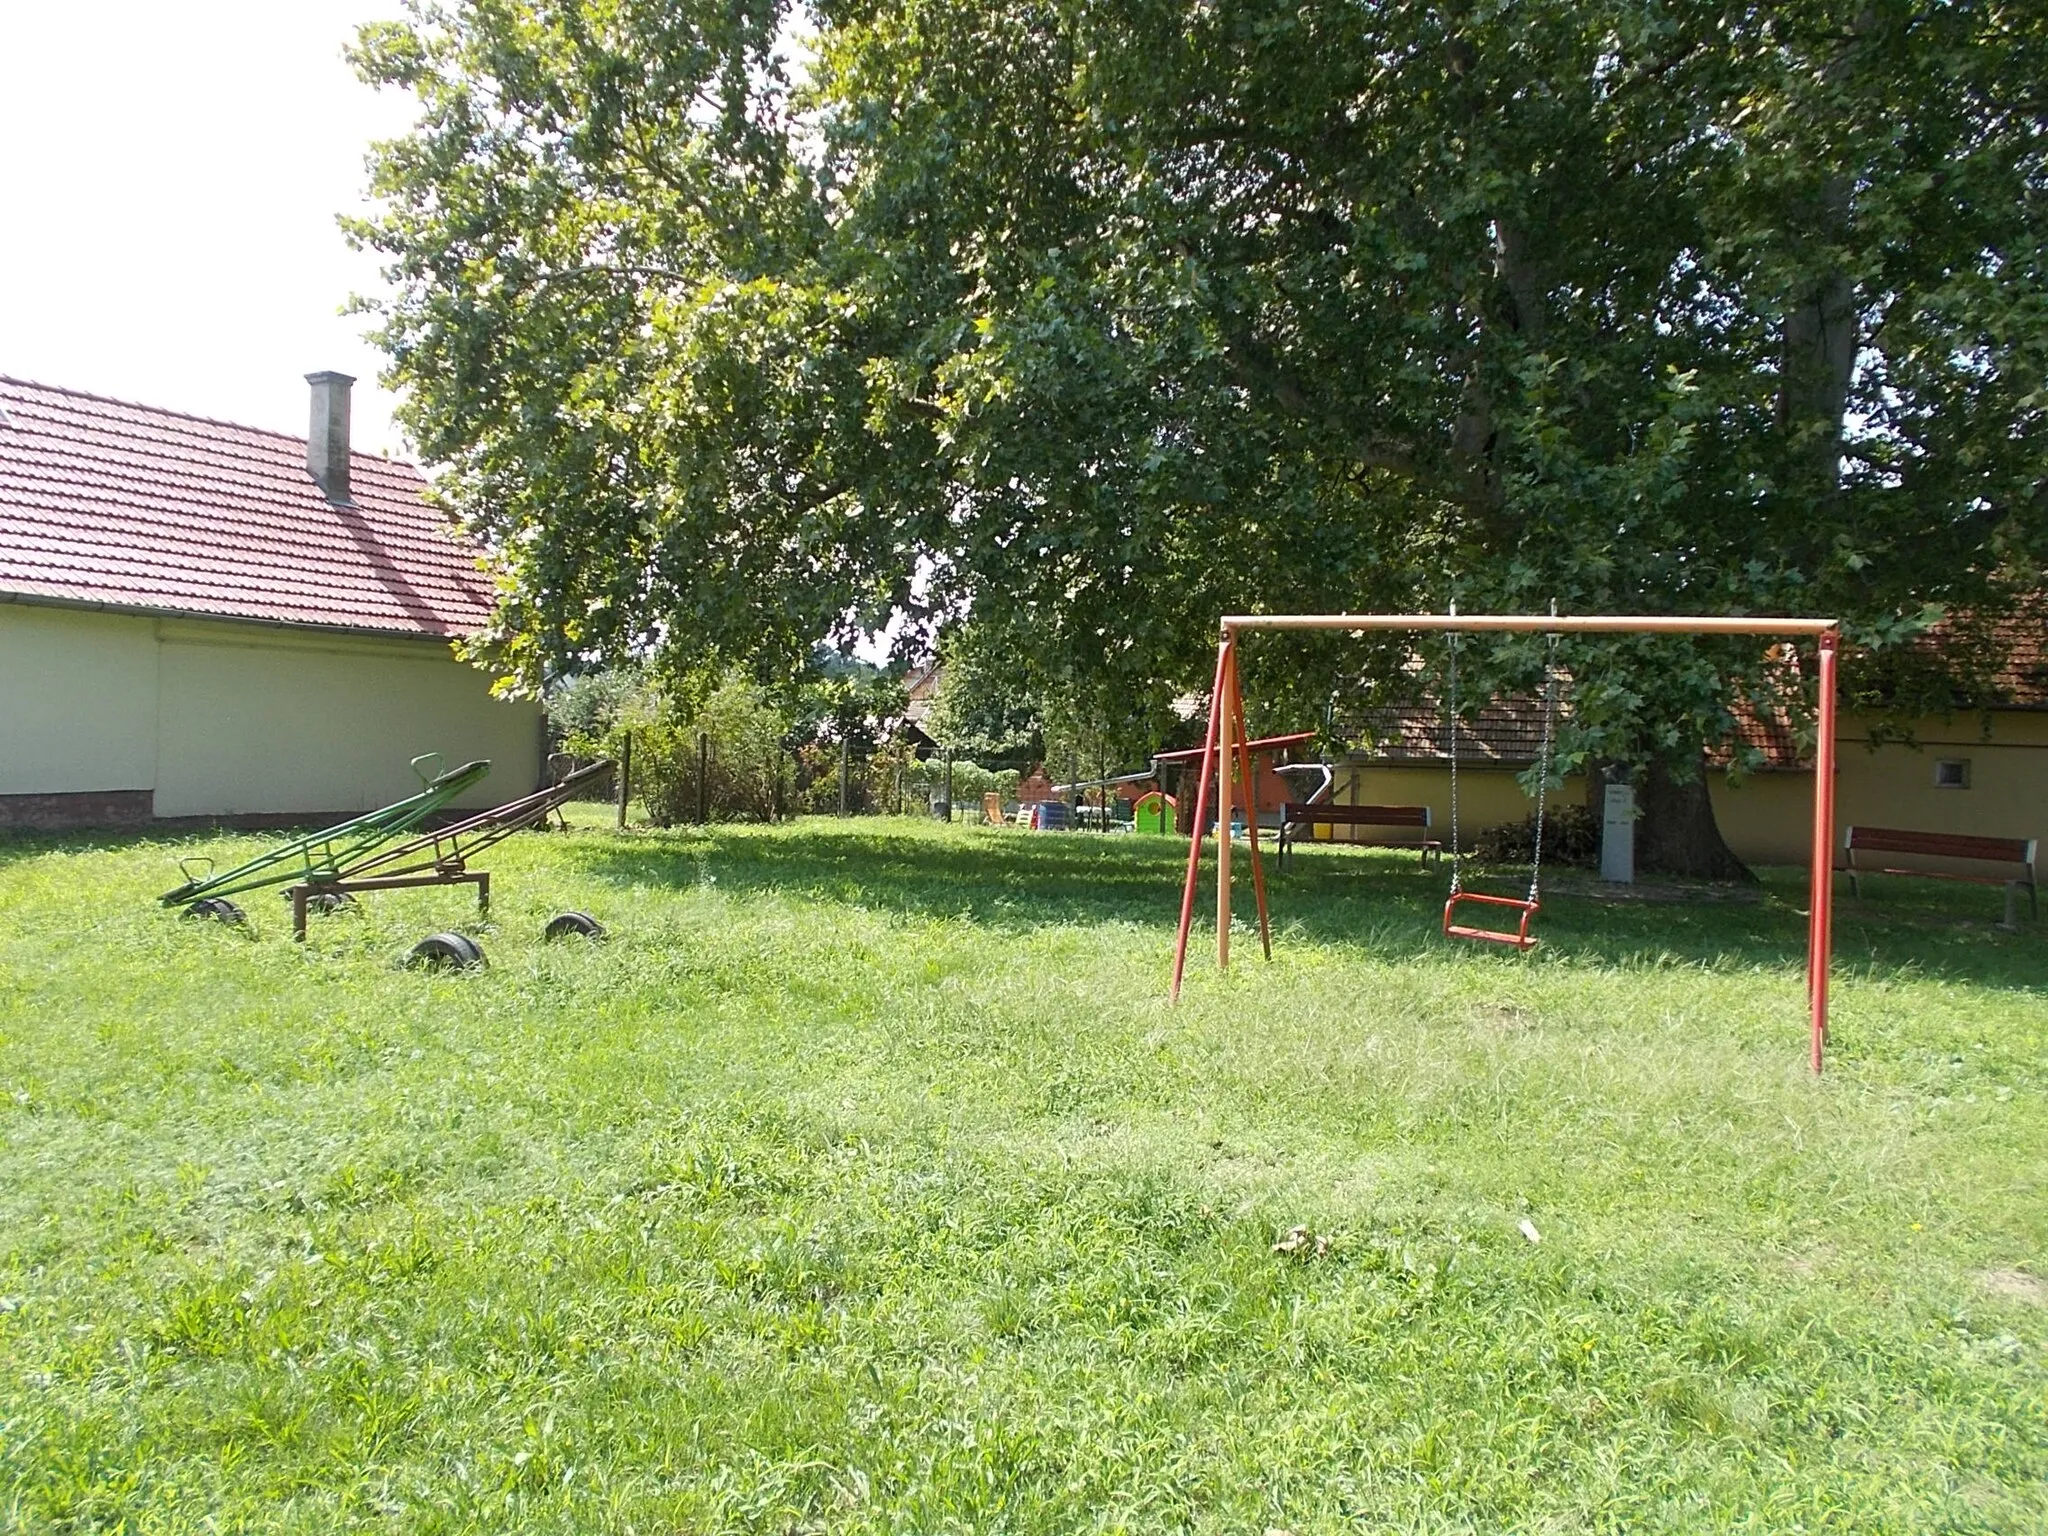 Photo showing: : Playground in park at Lengyelkert Street and Táncsics Mihály Street corner, Marcali, Somogy County, Hungary.